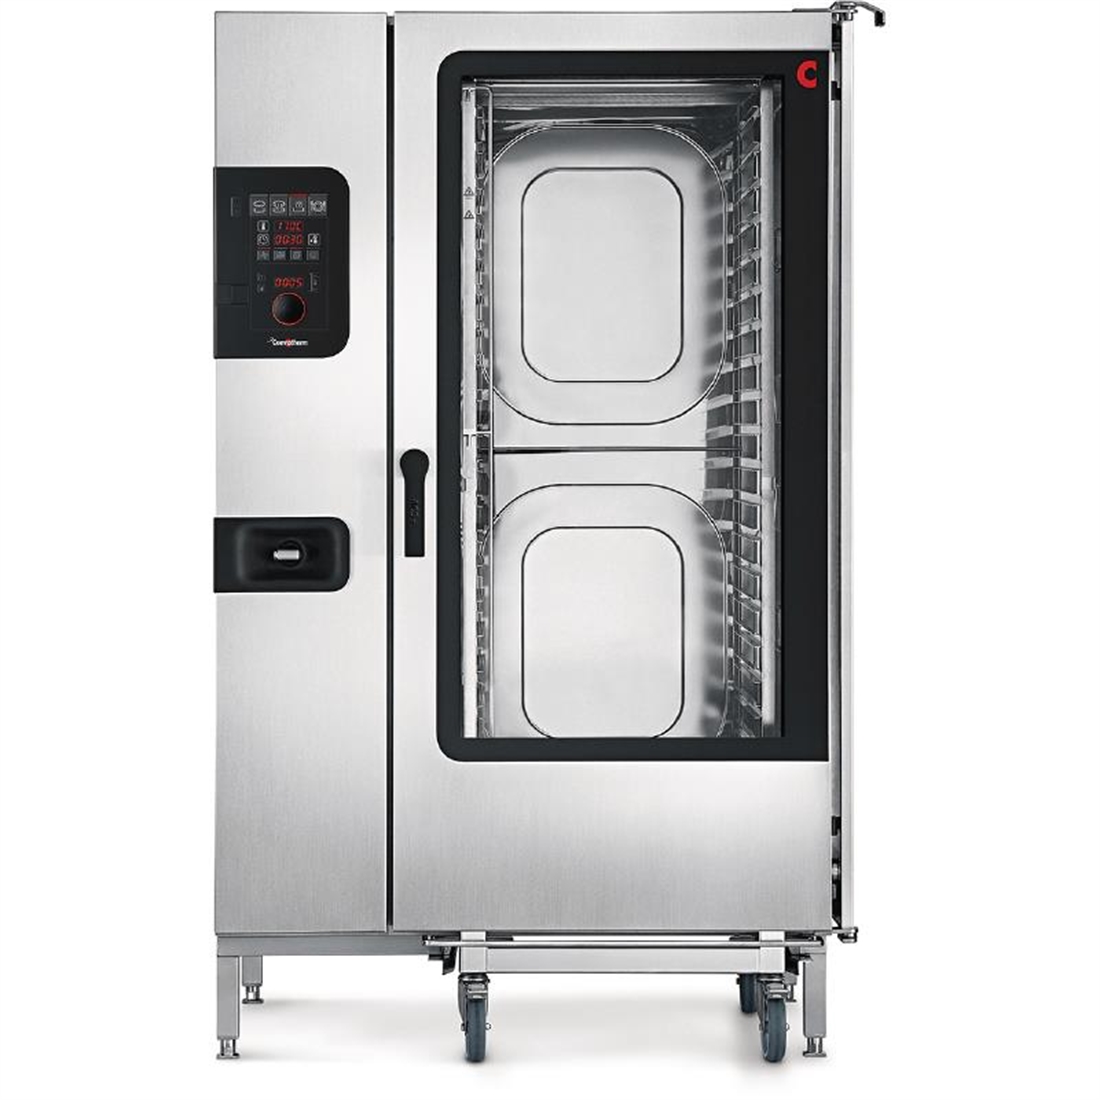 Convotherm 4 easyDial Combi Oven 20 x 2 x1 GN Grid